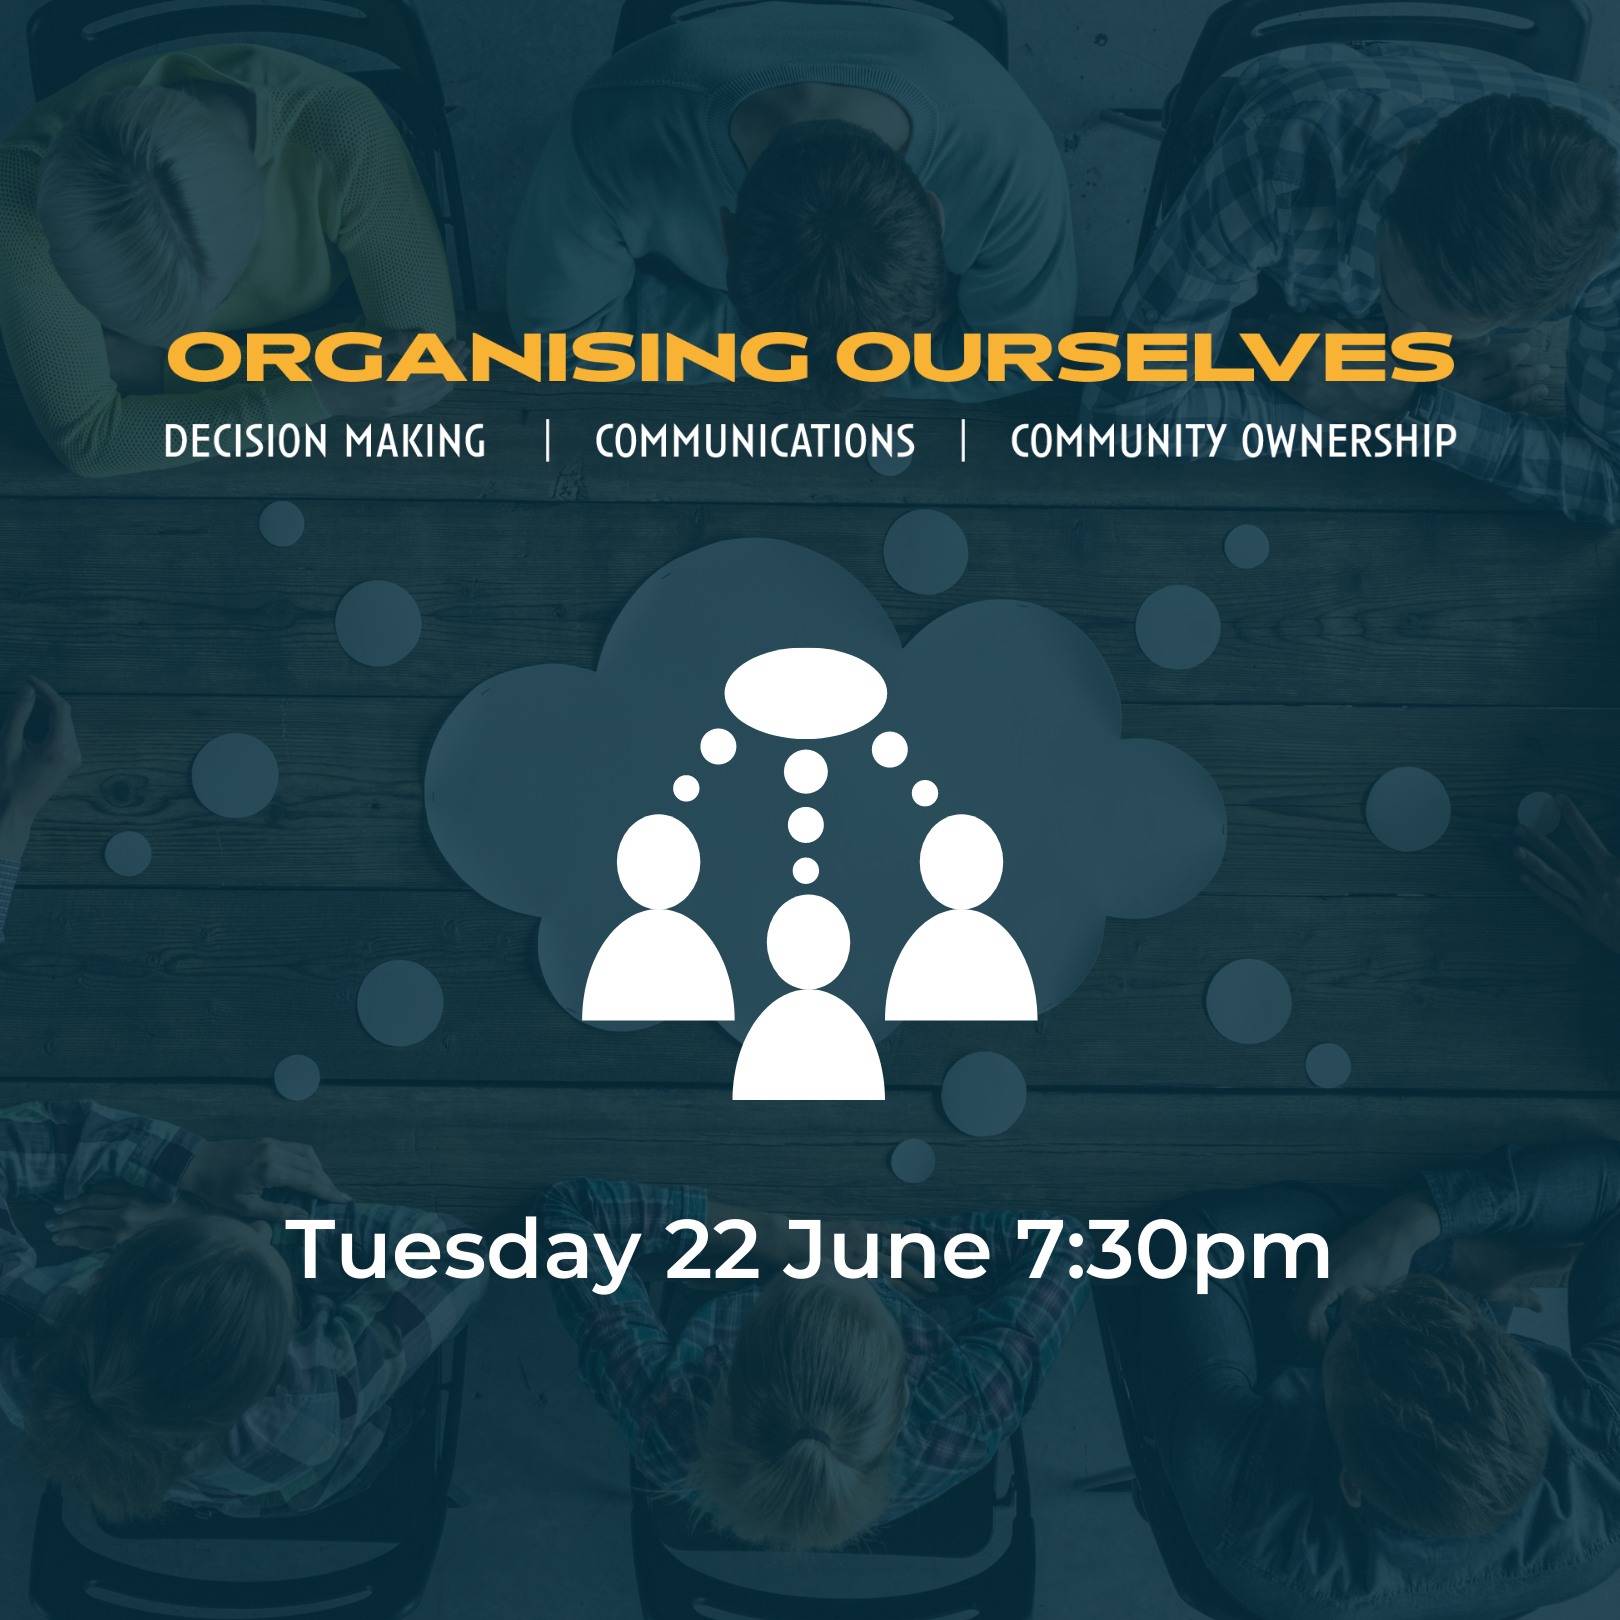 Zoom details: organising ourselves workshop tuesday 22 june 7:30pm